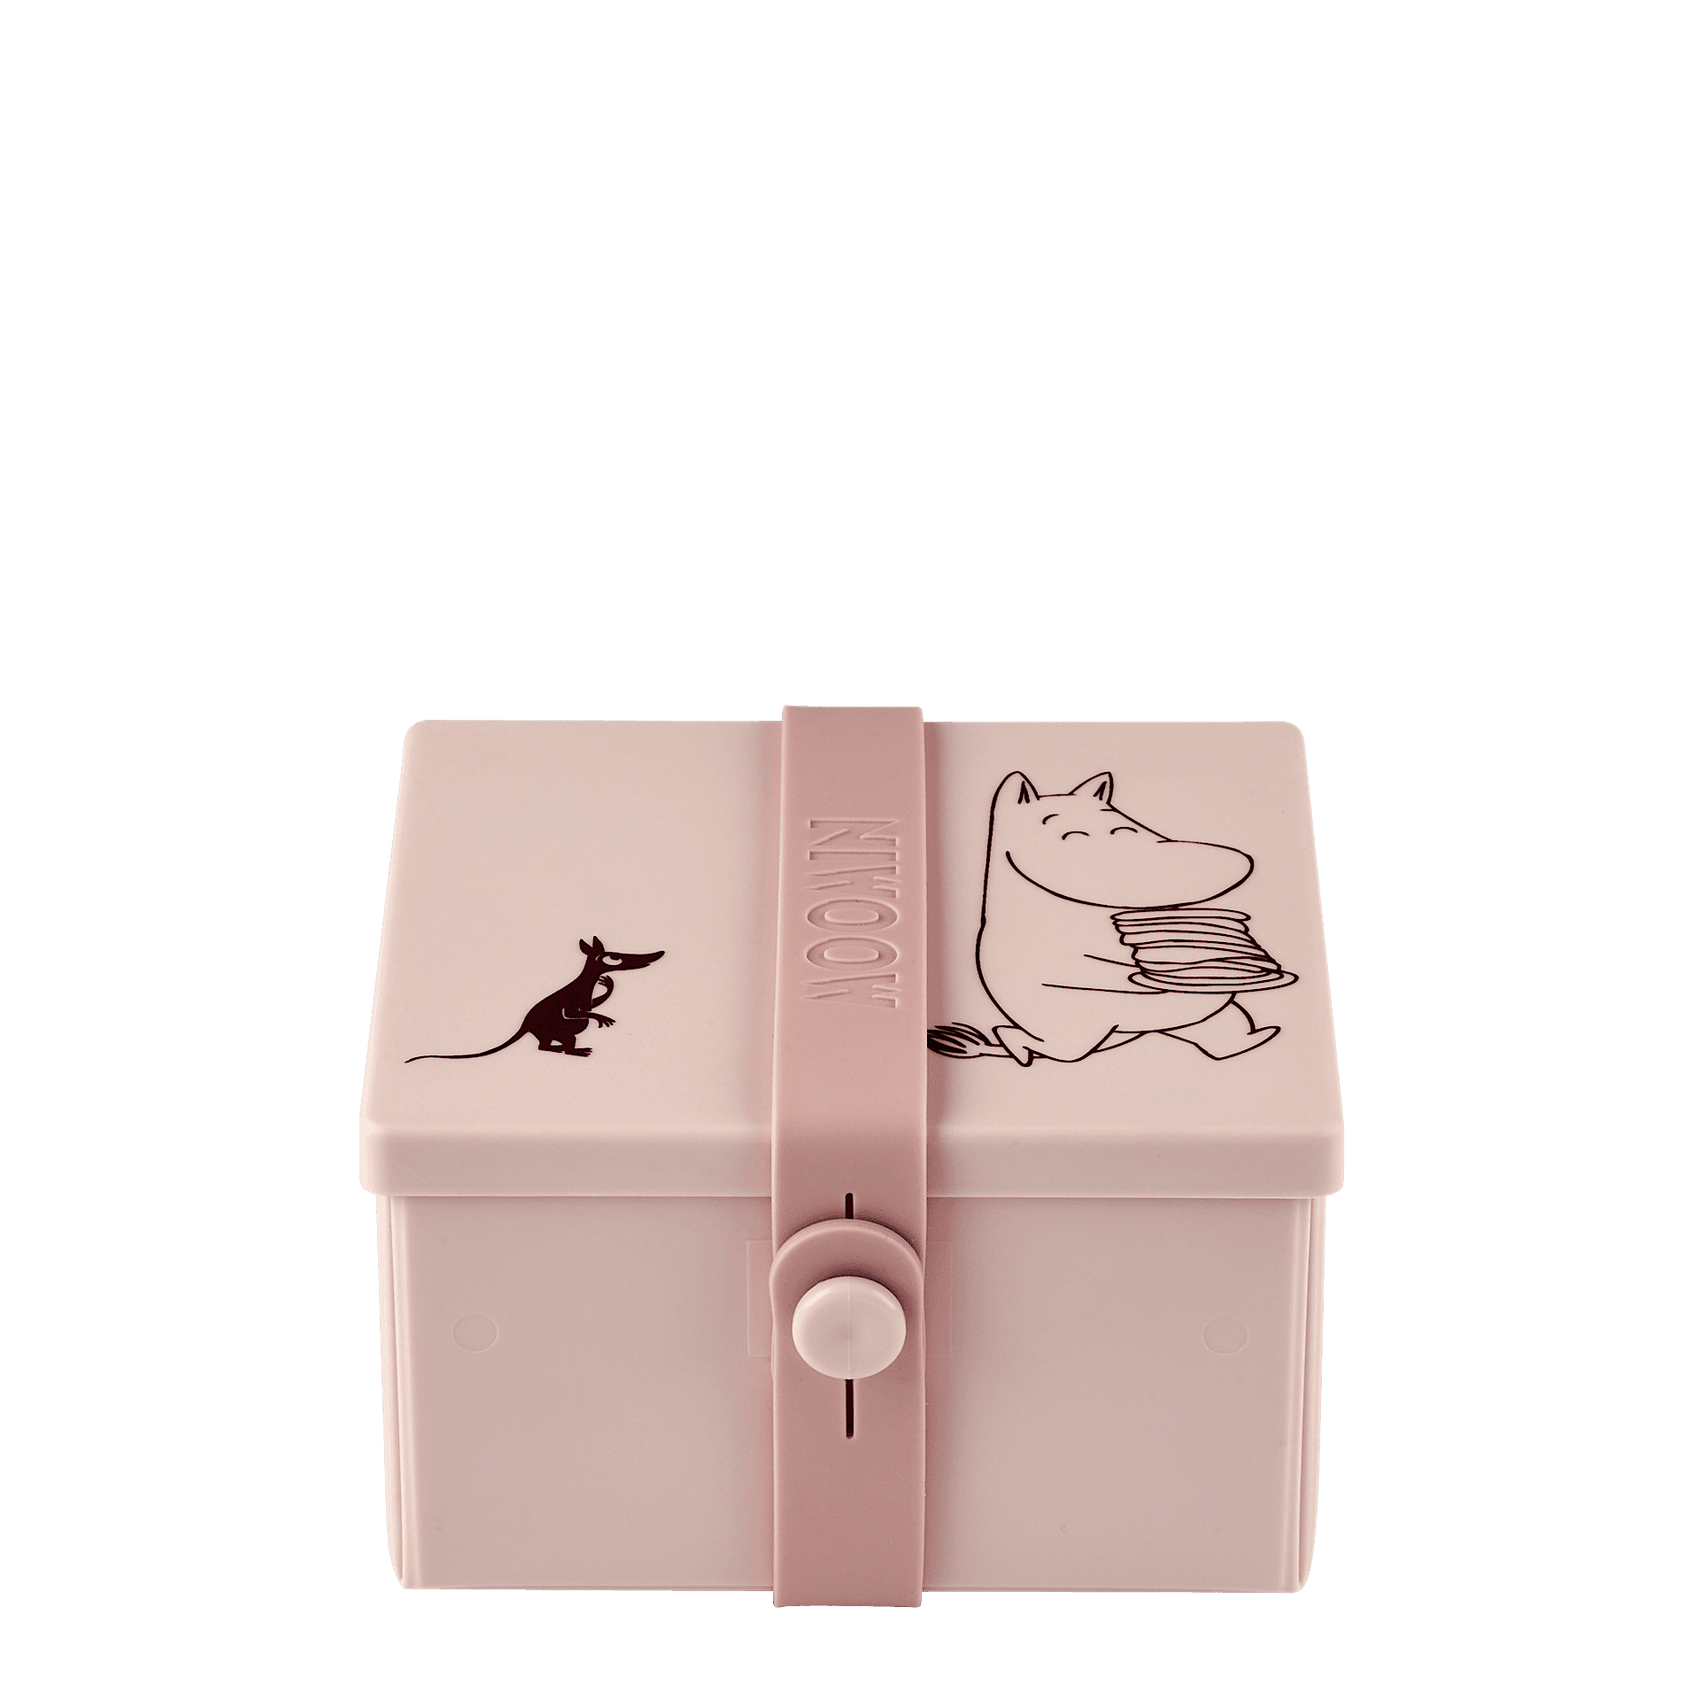 The Moomins Lunch Box 02, square, delicate pink